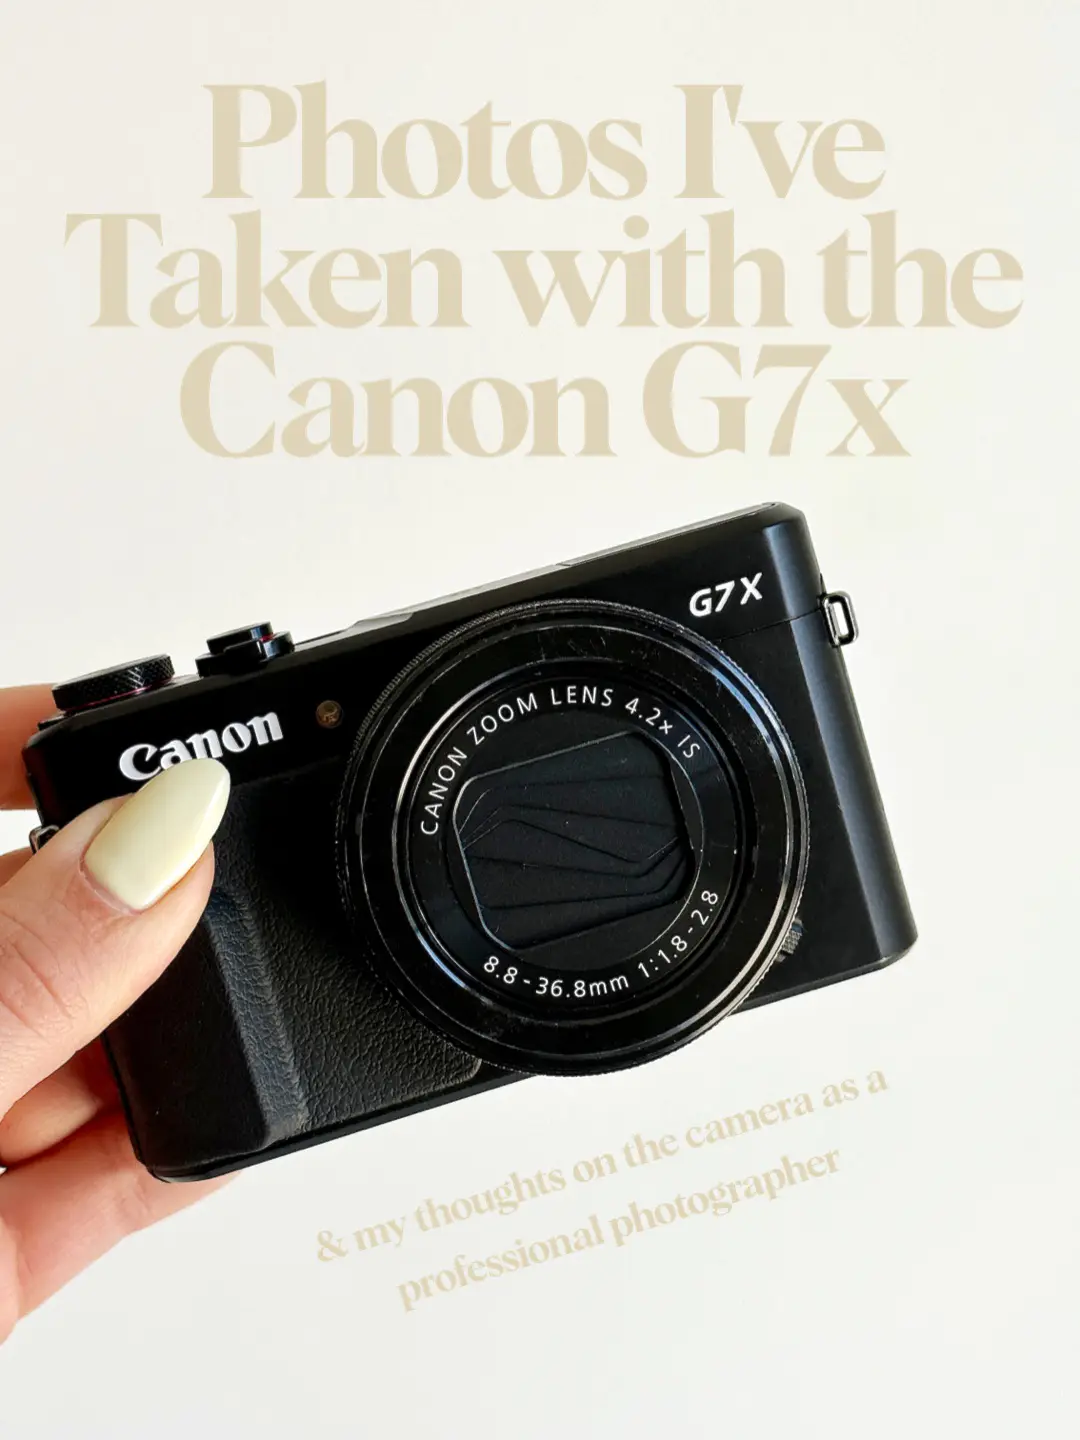 Canon PowerShot G7 X Mark II Review: Our Favorite Point-and-Shoot